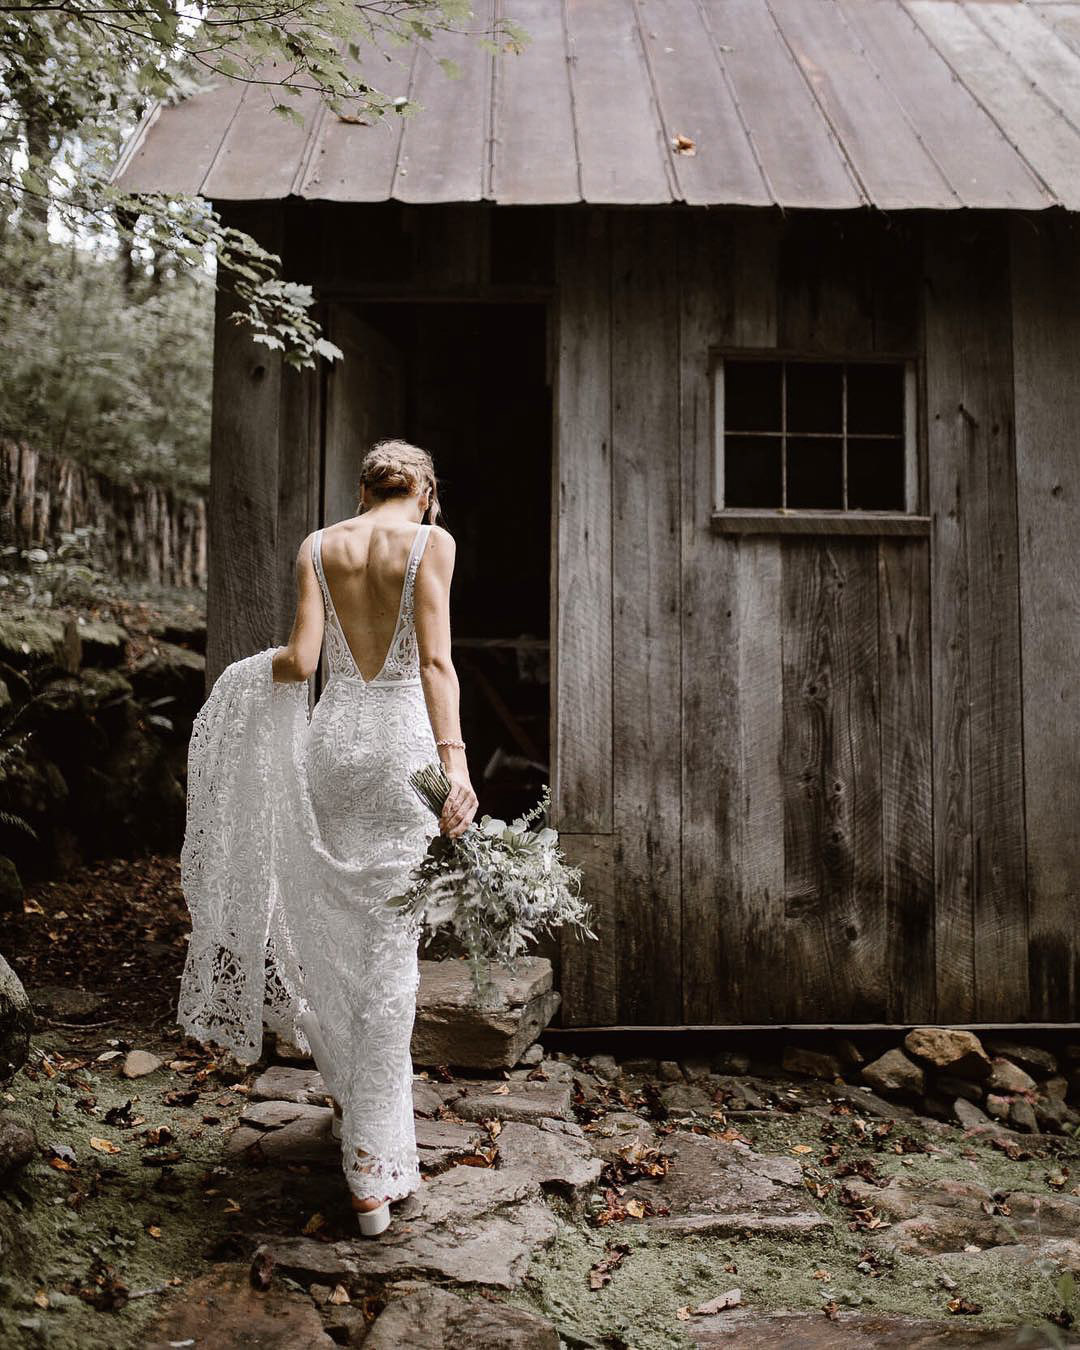 a bride in her wedding attire entering a wooden shack with her wedding bouquet